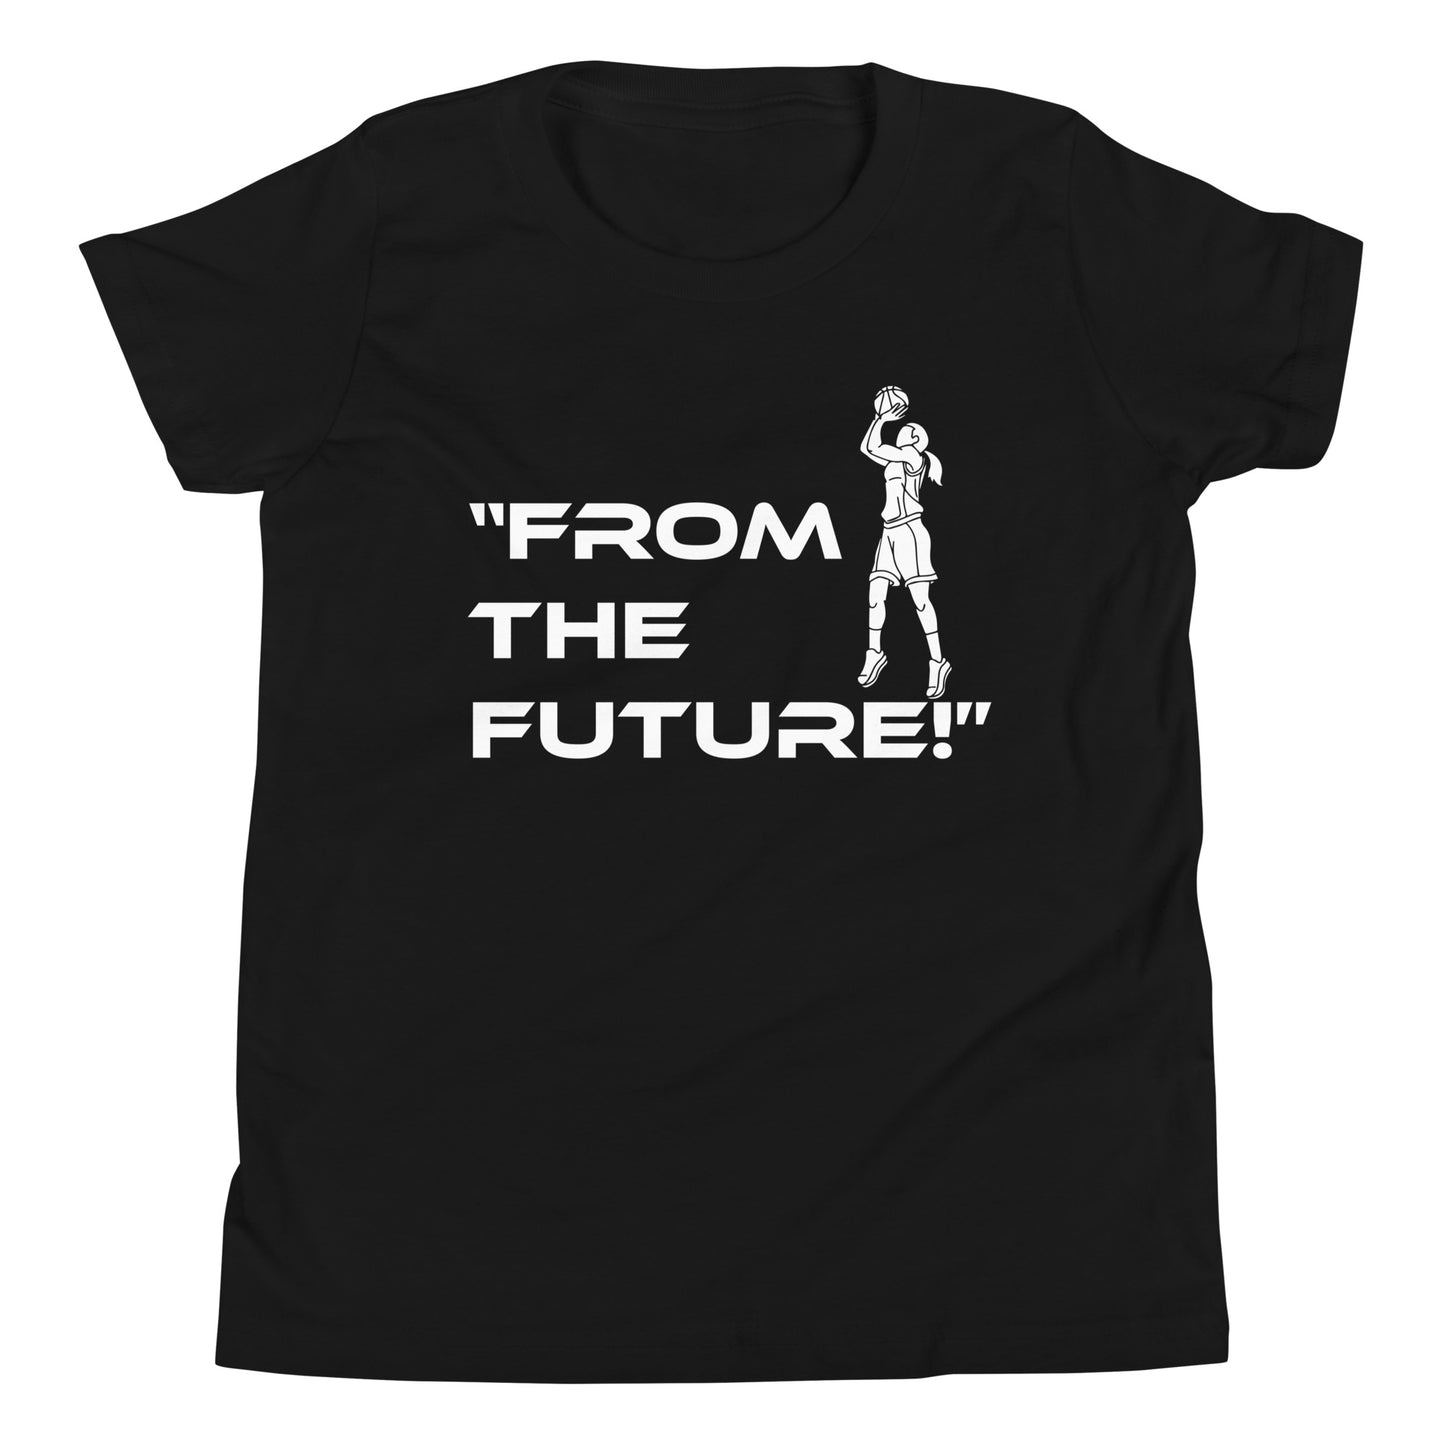 From the future Youth Short Sleeve T-Shirt-Stylish and Soft Everyday Tee